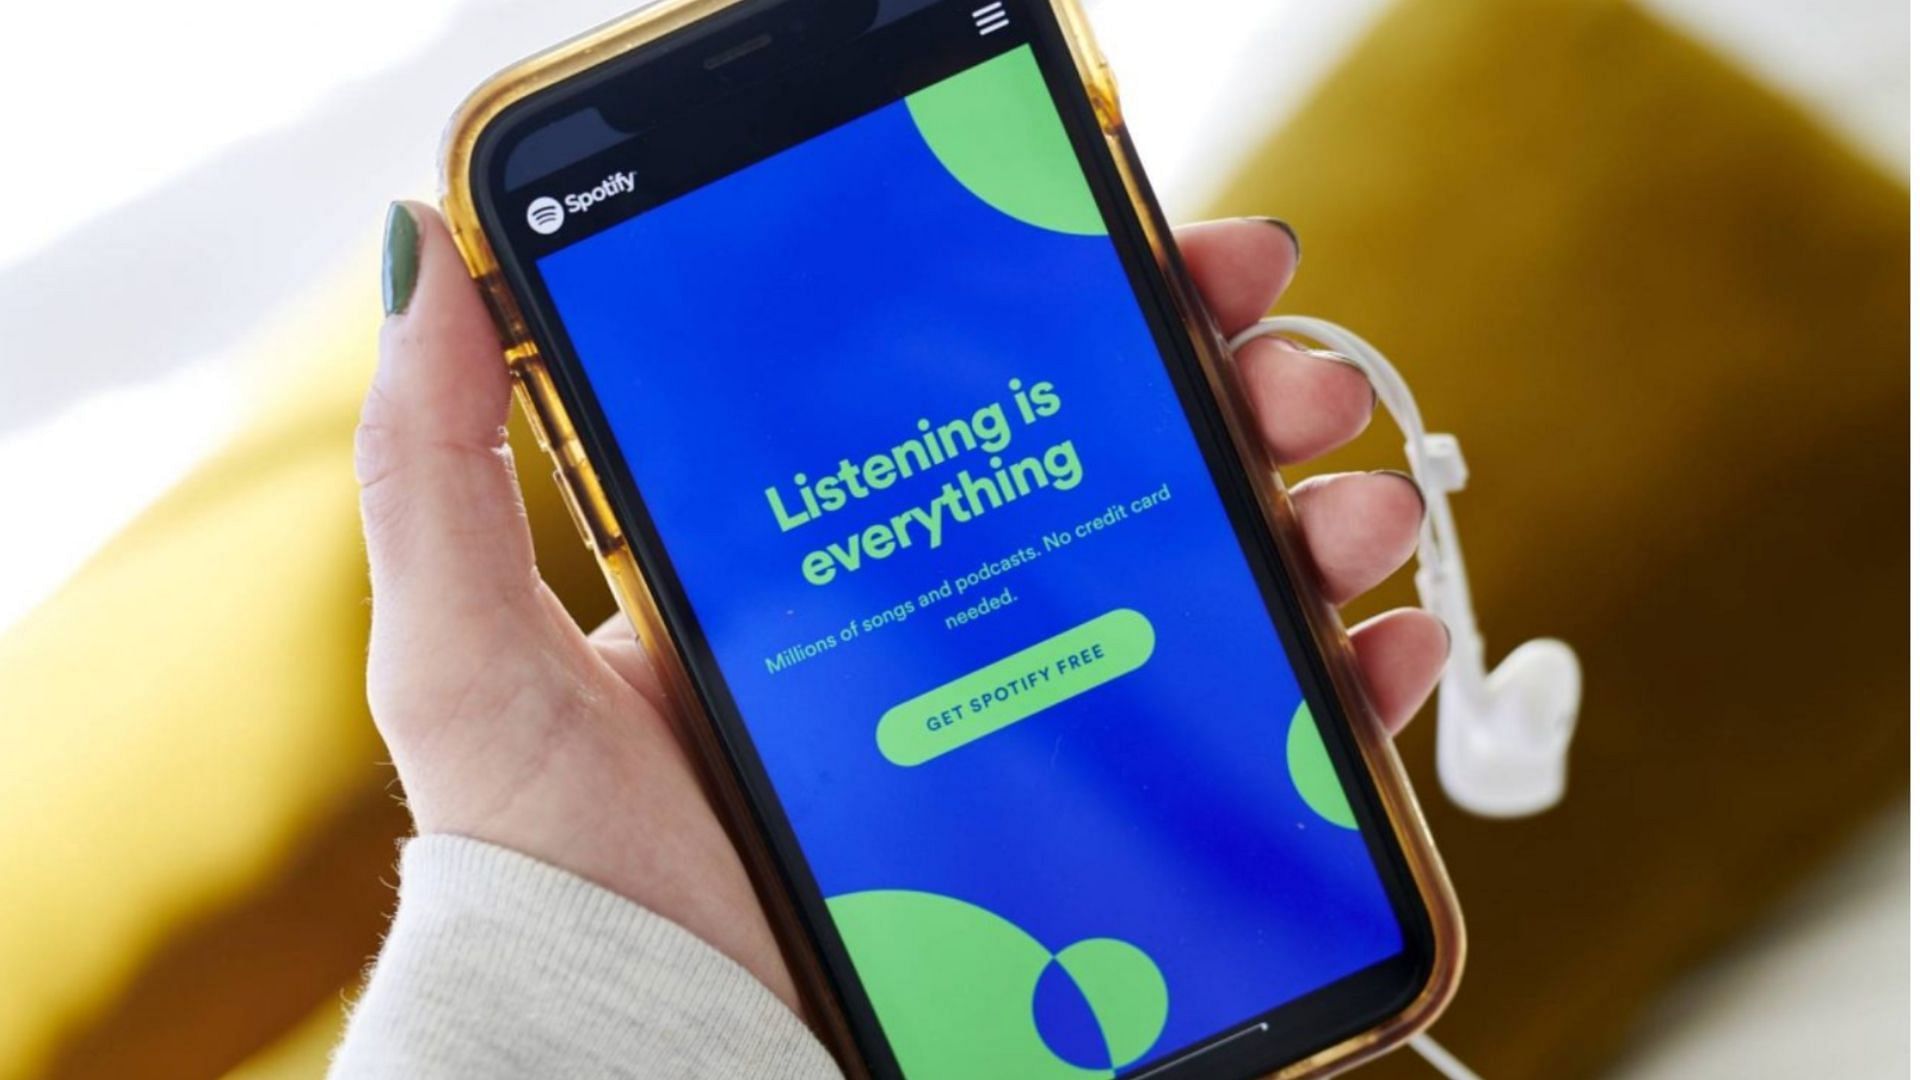 Spotify has closed its offices in Russia in response to the Ukraine crisis (Image via Getty)